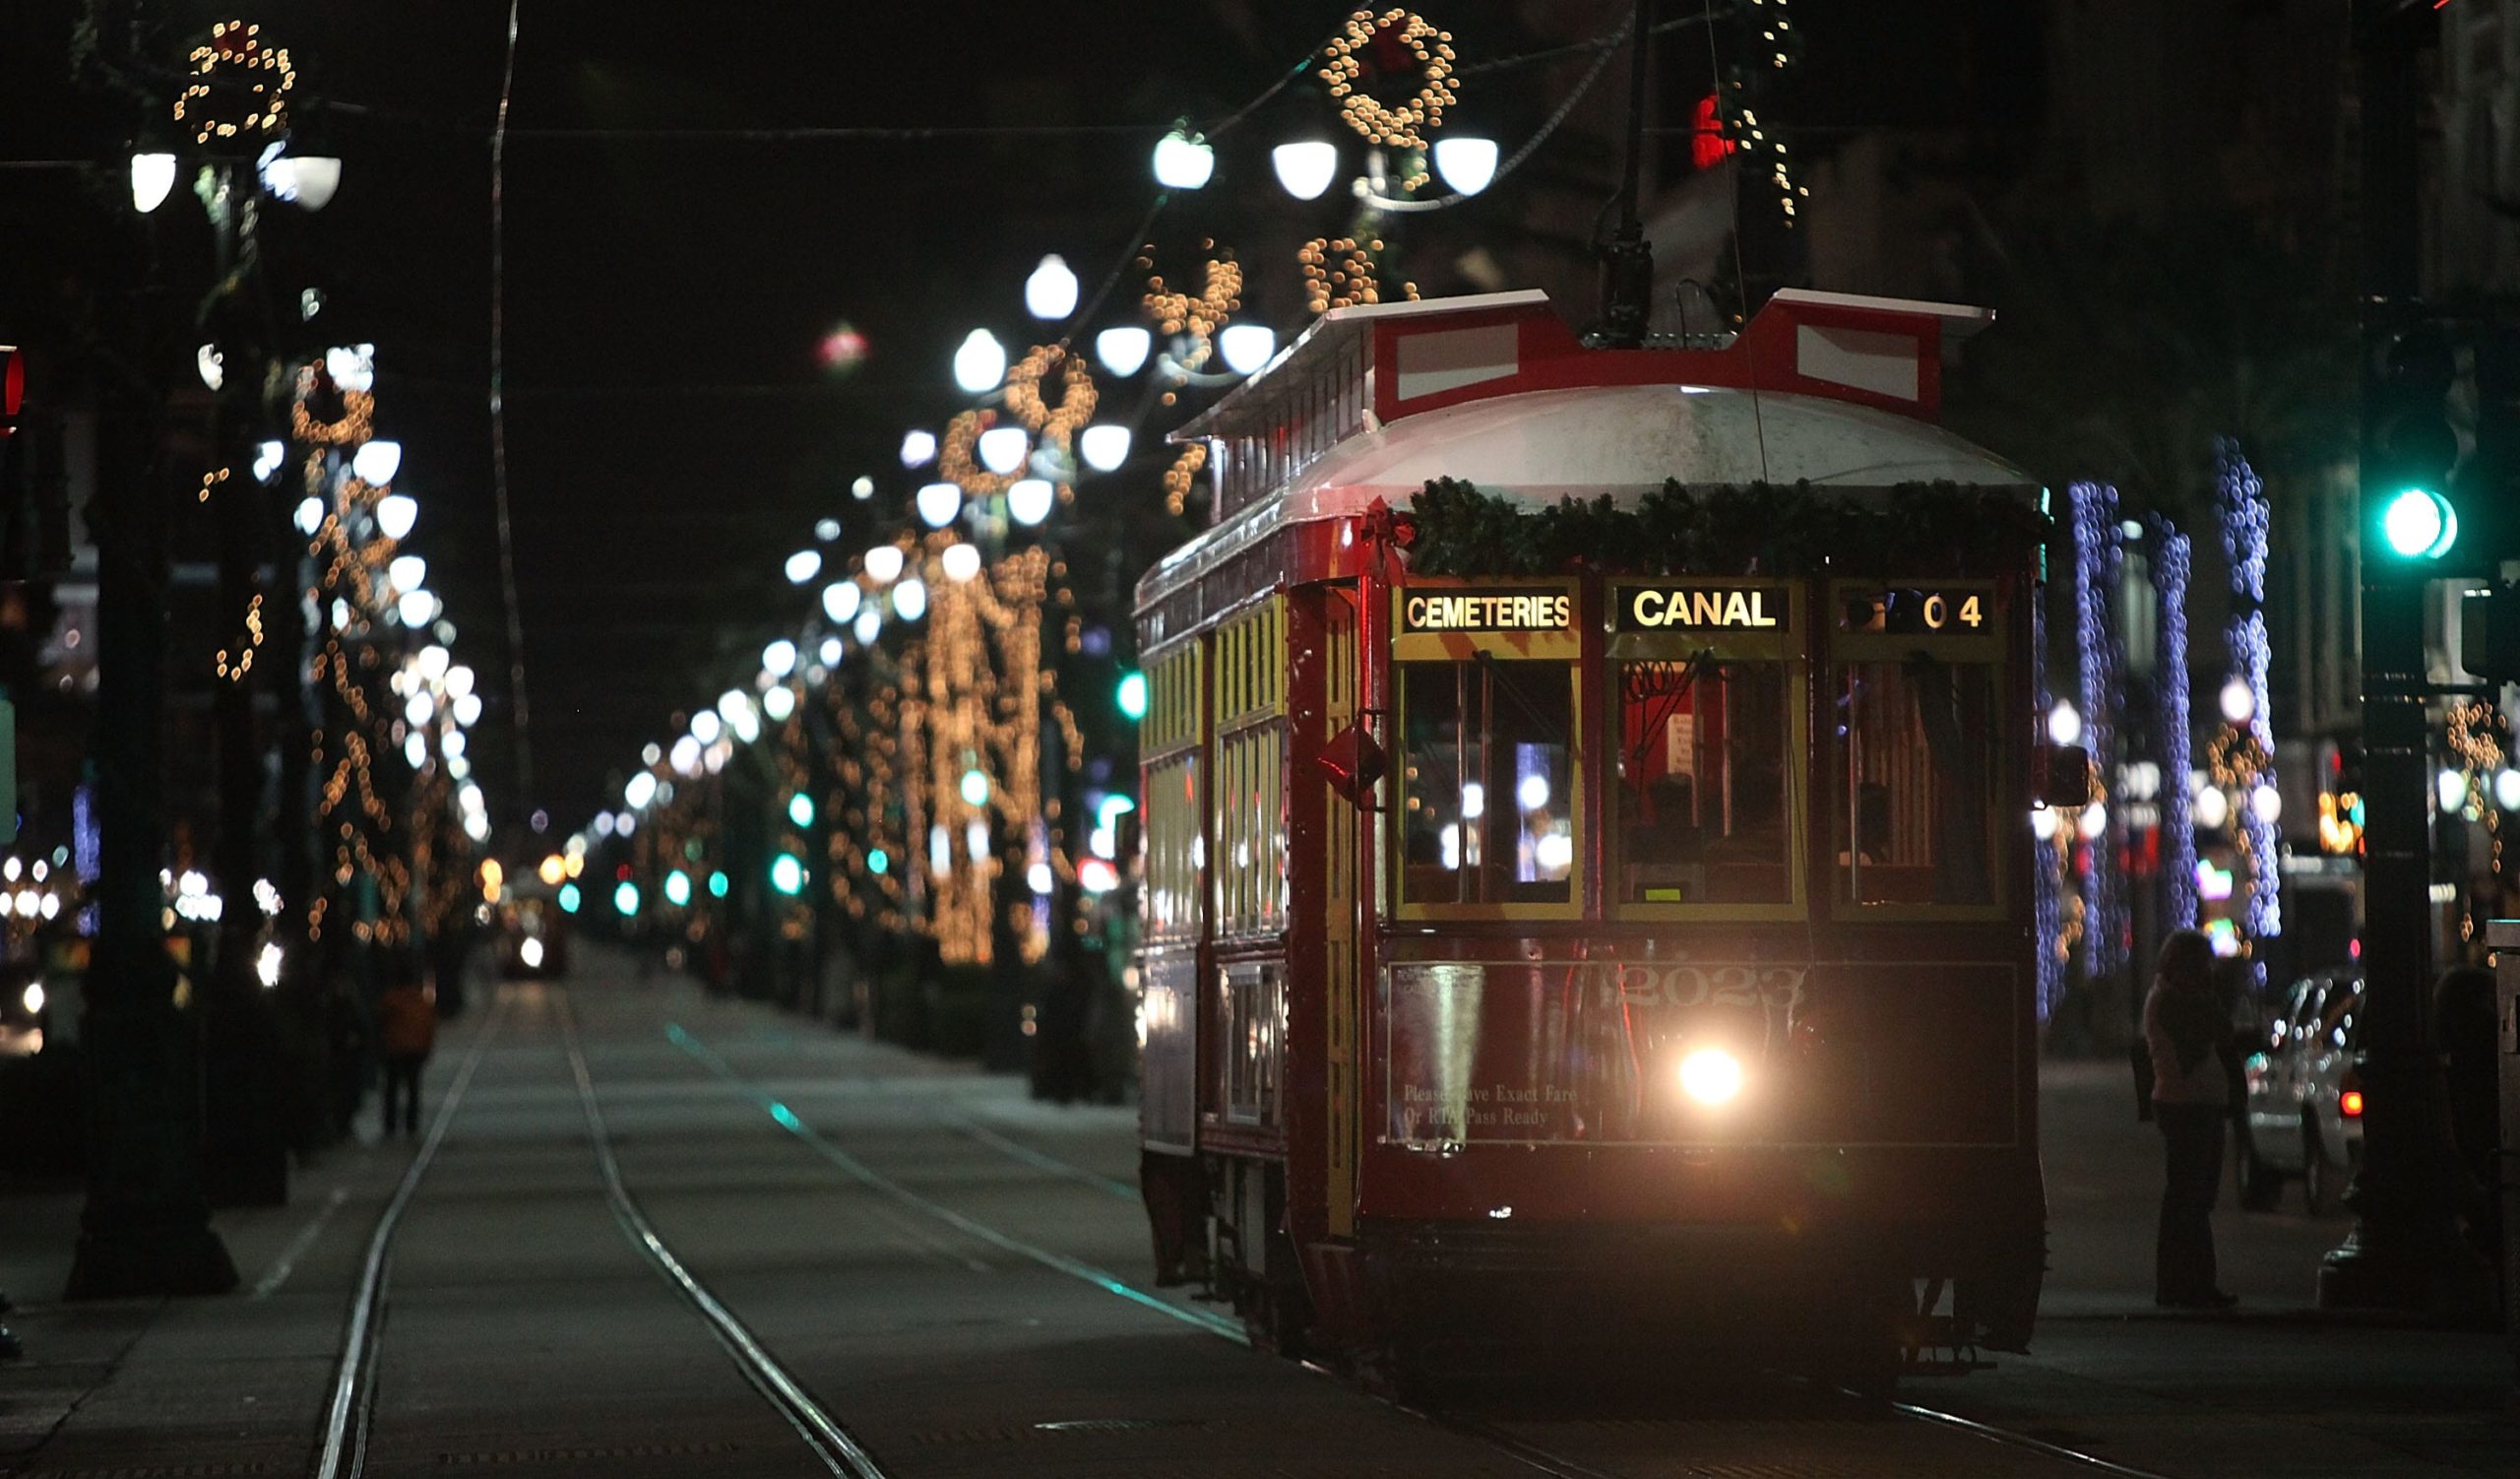 NEW ORLEANS - DECEMBER 02: A streetcar passes along Canal Street decorated with Christmas lights December 2, 2009 in New Orleans, Louisiana. People across the country are getting into the holiday spirit as Christmas approaches. (Photo by Mario Tama/Getty Images)